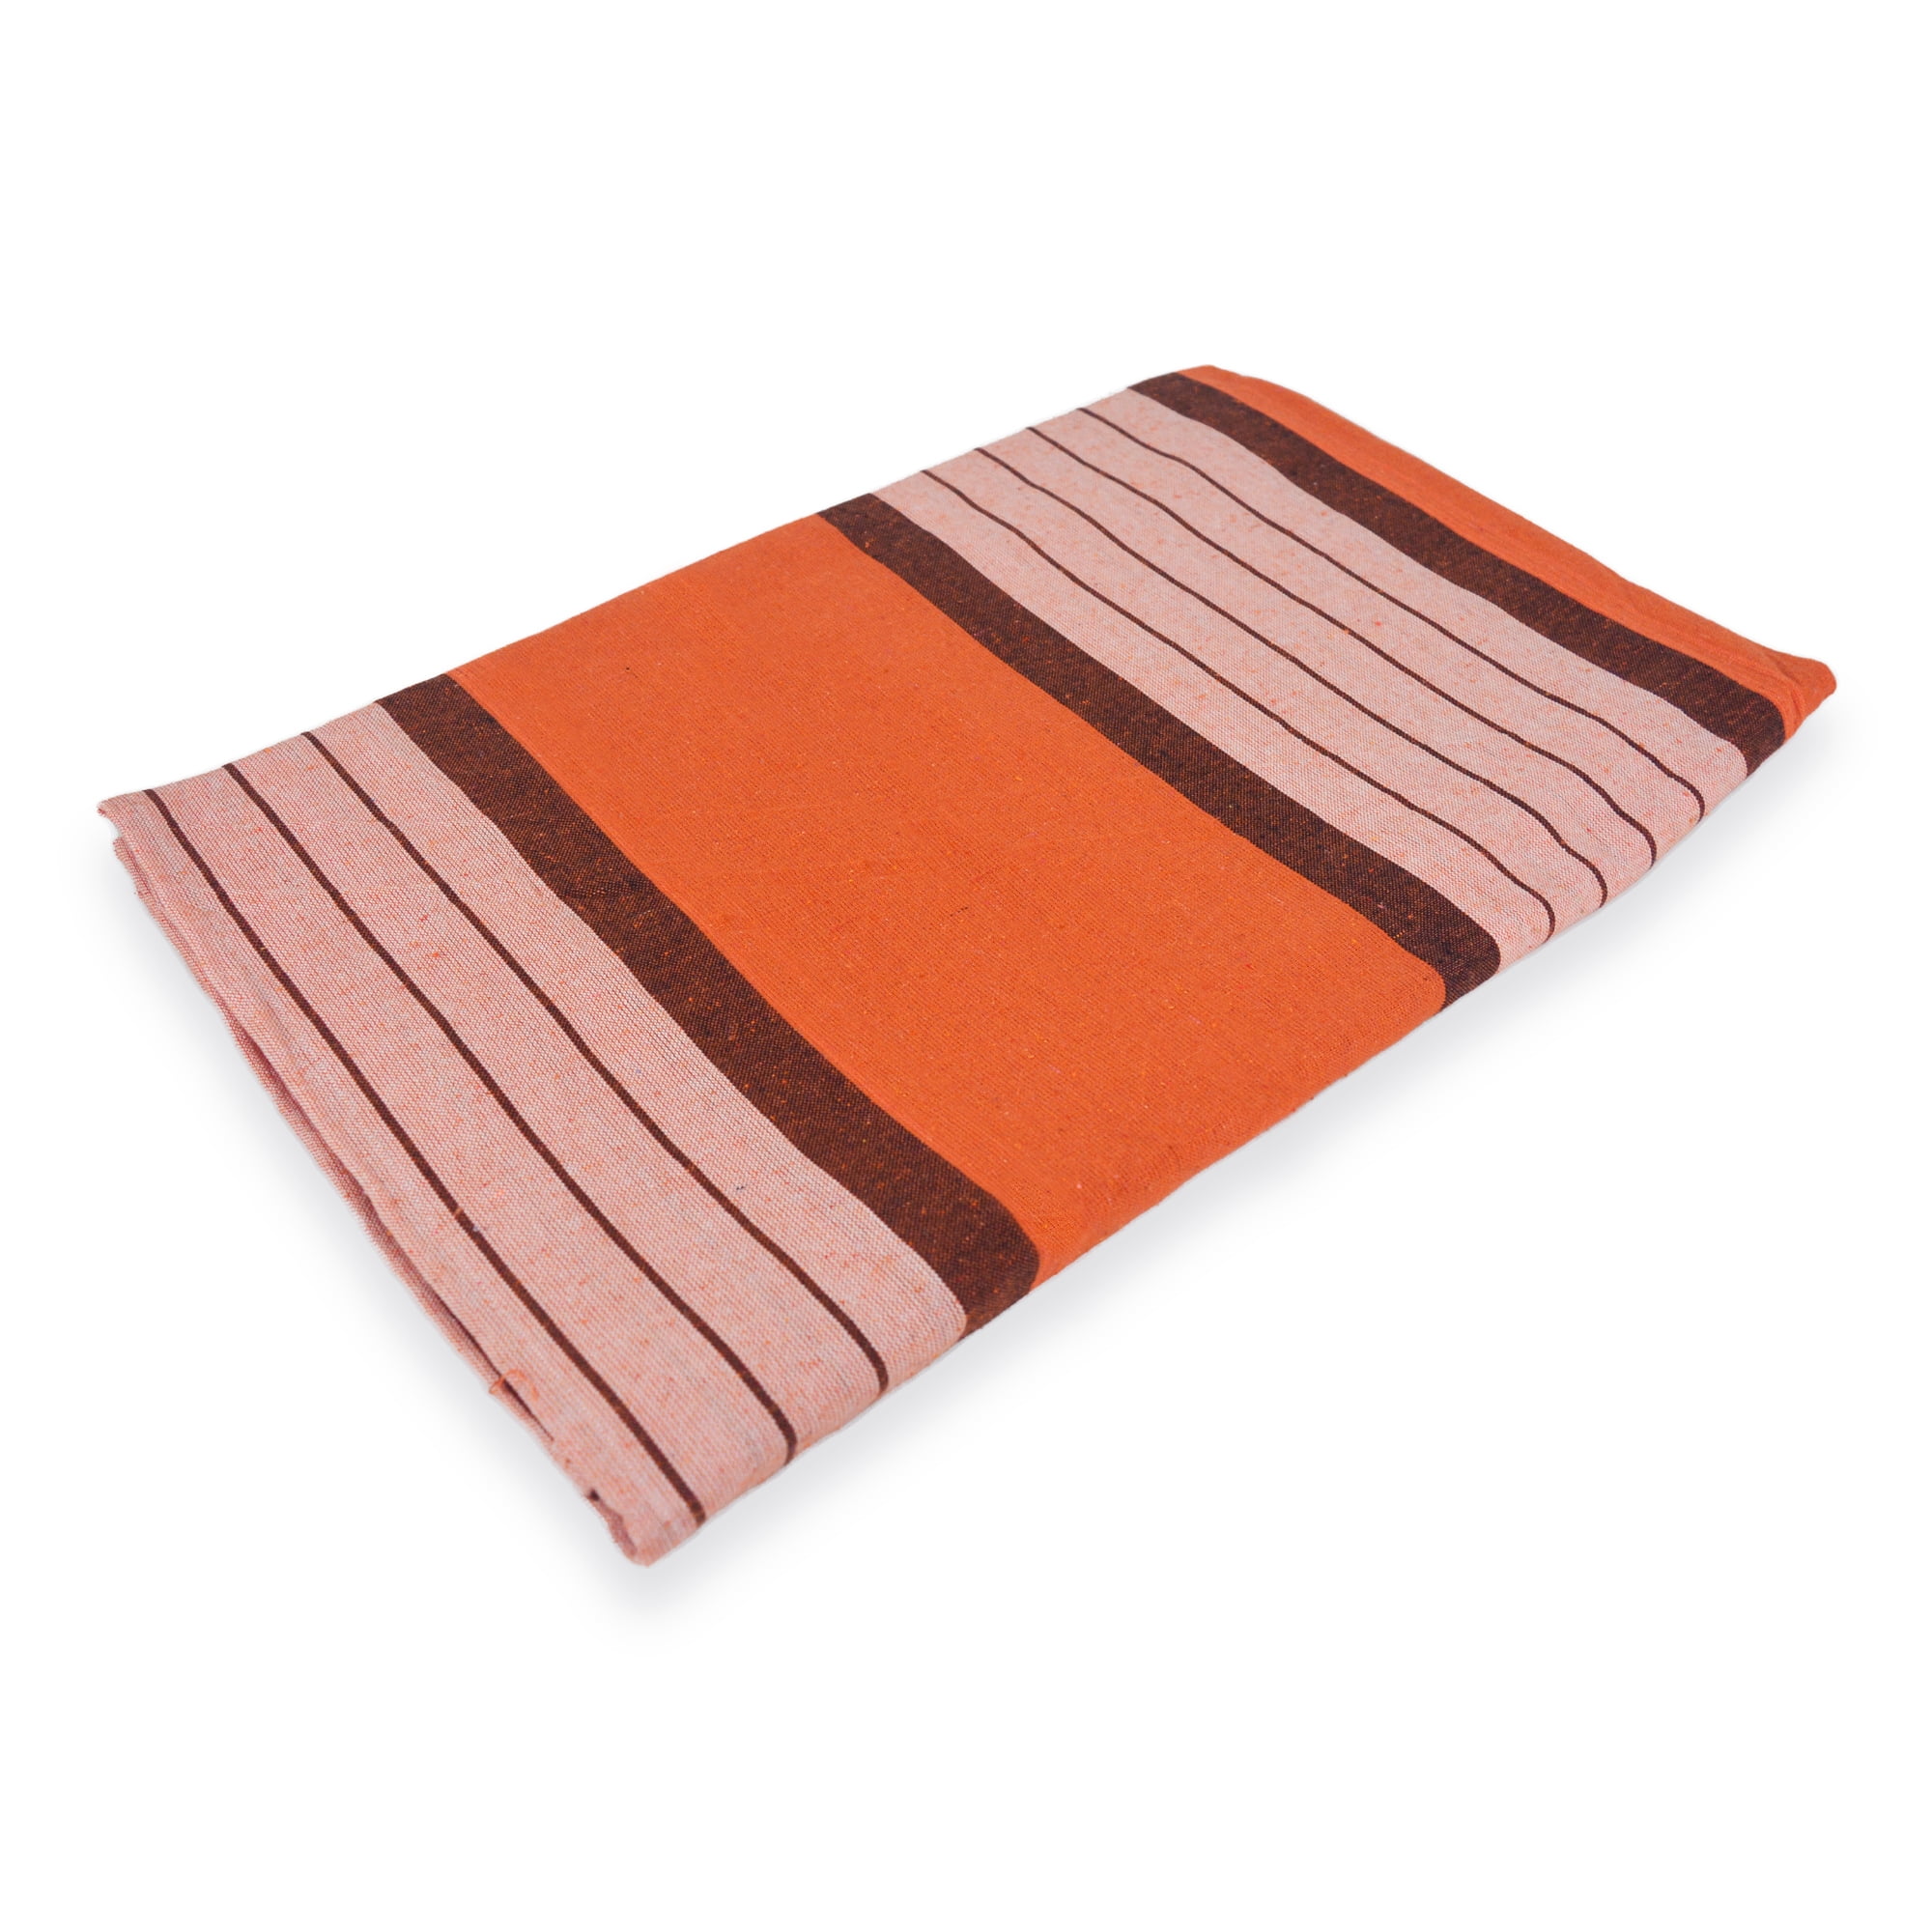 Cotton Handloom Bed Sheet 72x90 (Inches) for Queen, Double & Single Beds Orange Brown